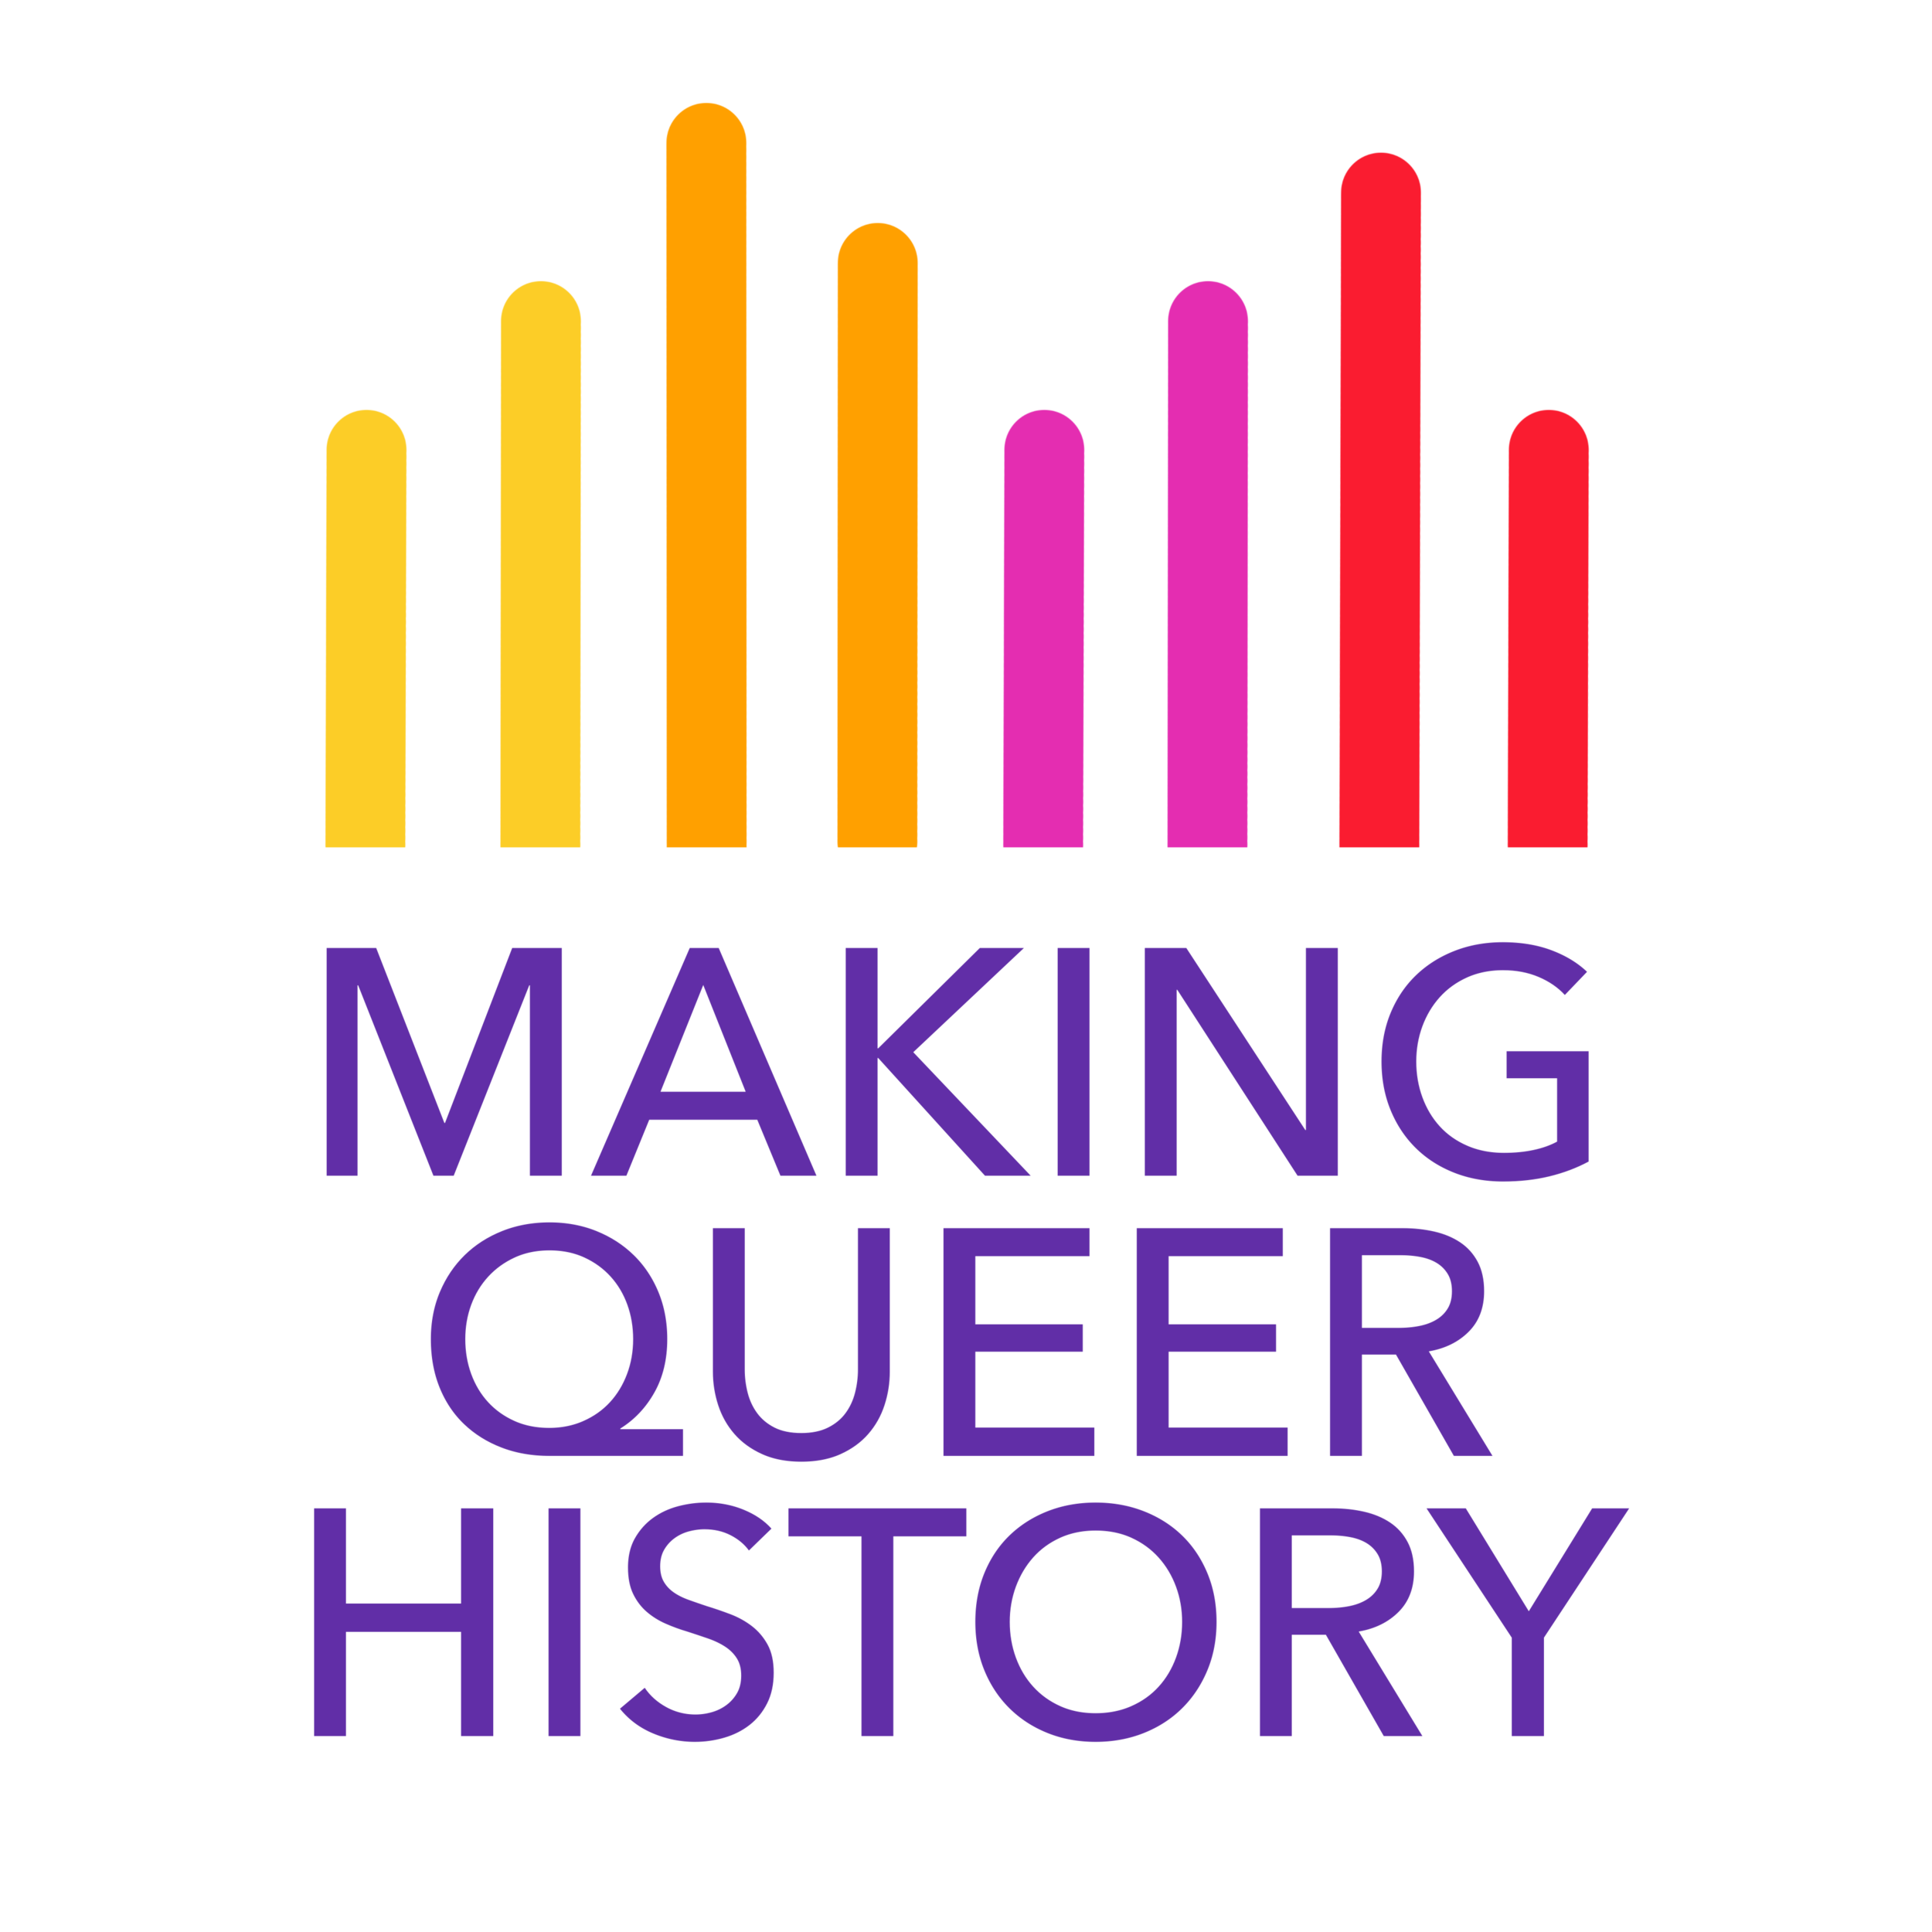 Yellow, orange, pink, and red bars representing a timeline and sound levels. Below, purple text reads "Making Queer History"